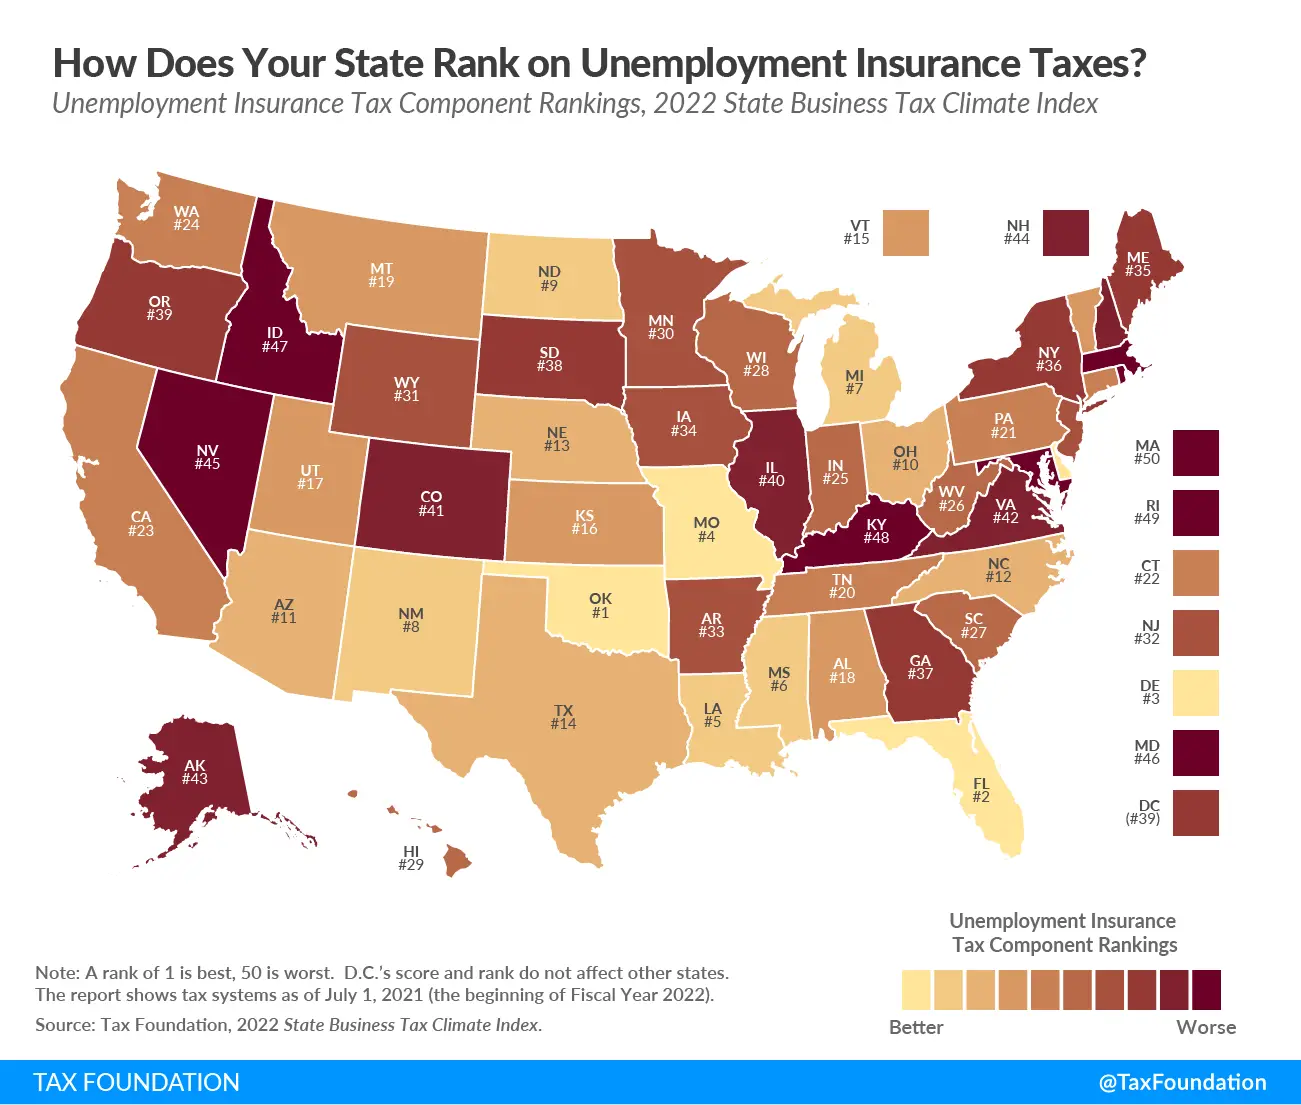 Ranking Unemployment Insurance Taxes by State, 2022